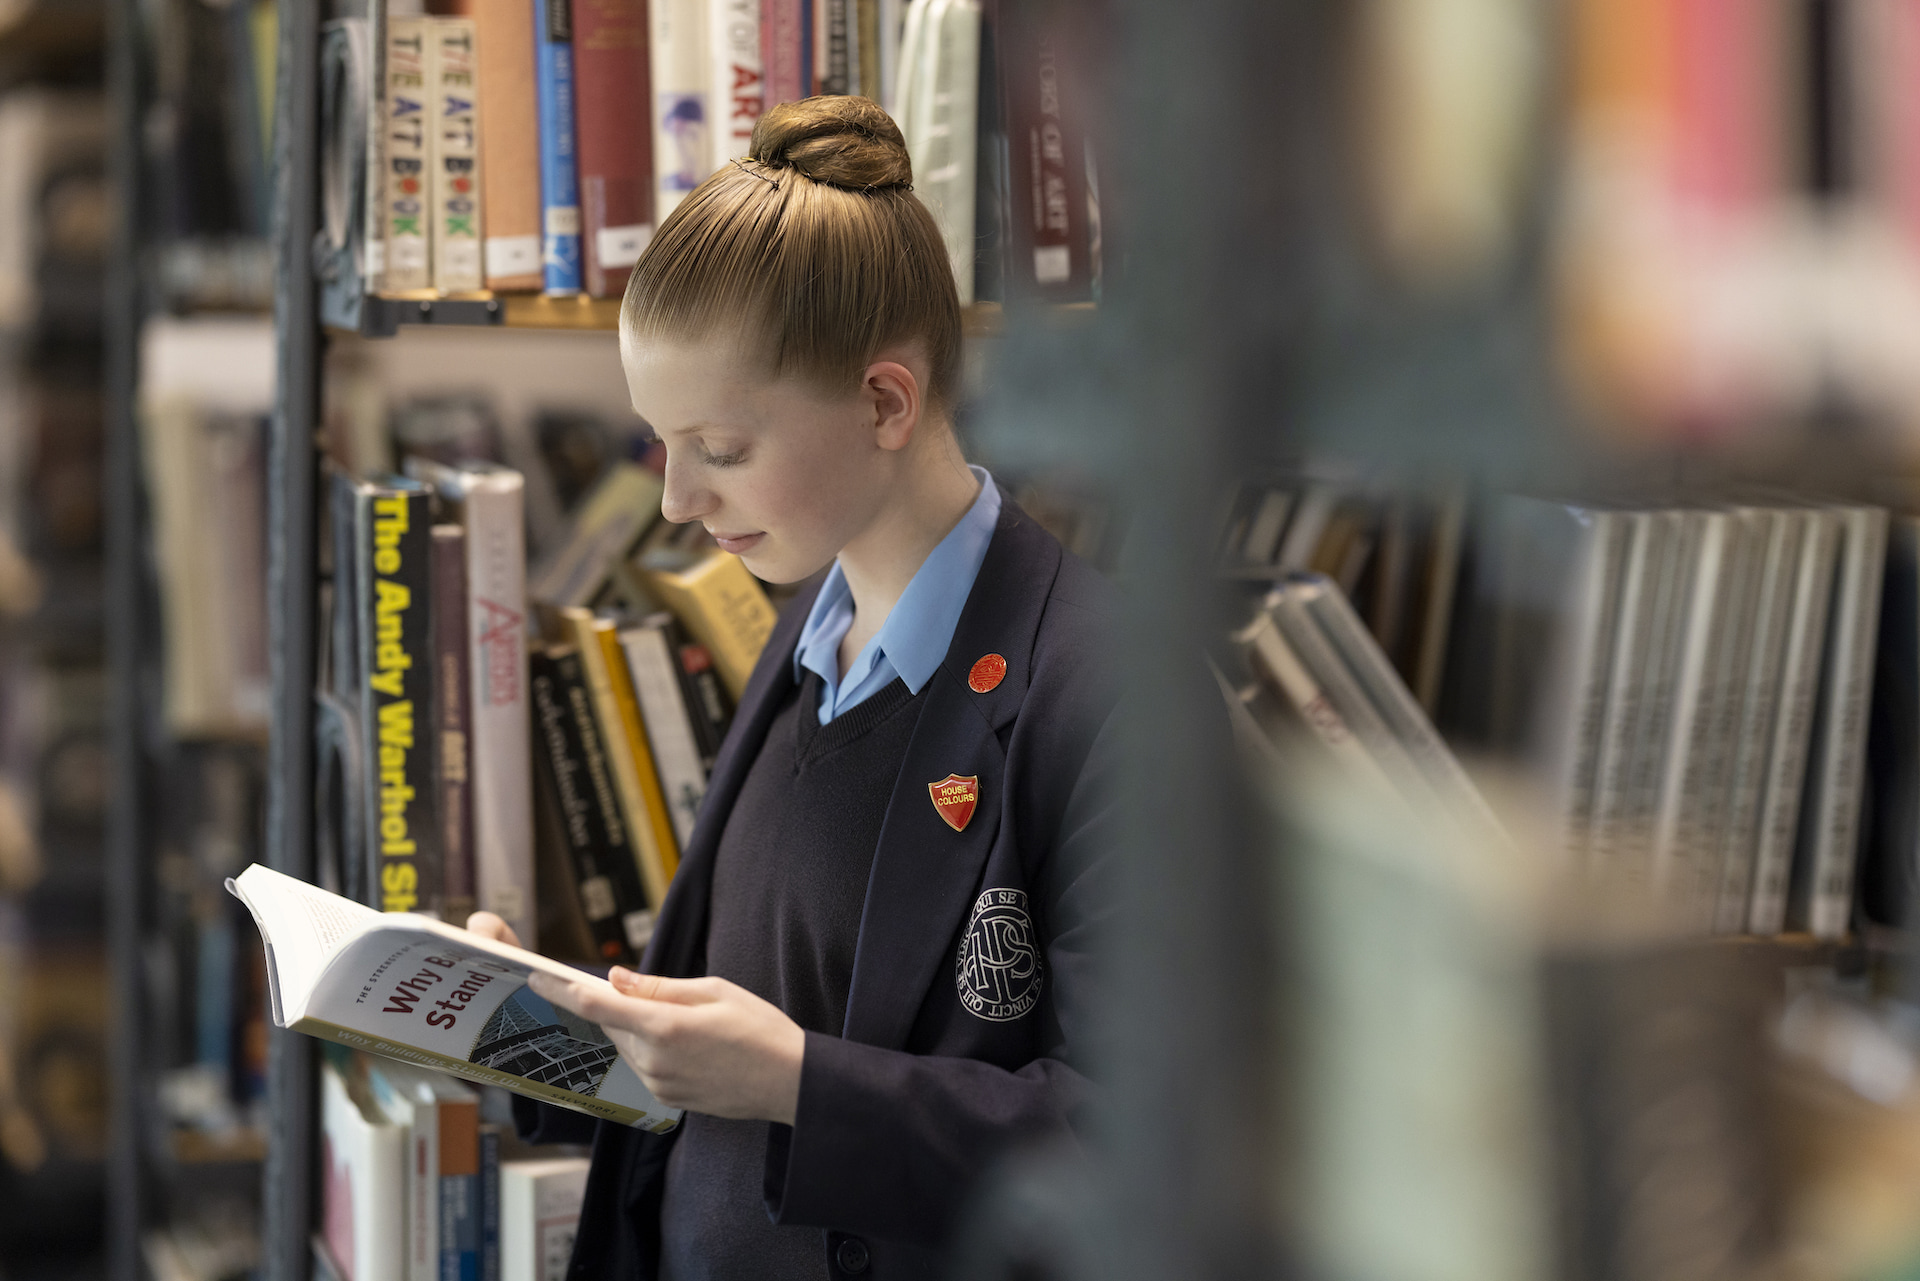 Senior pupils reading in the library at Ibstock Place School, a private school near Richmond, Barnes, Putney, Kingston, and Wandsworth